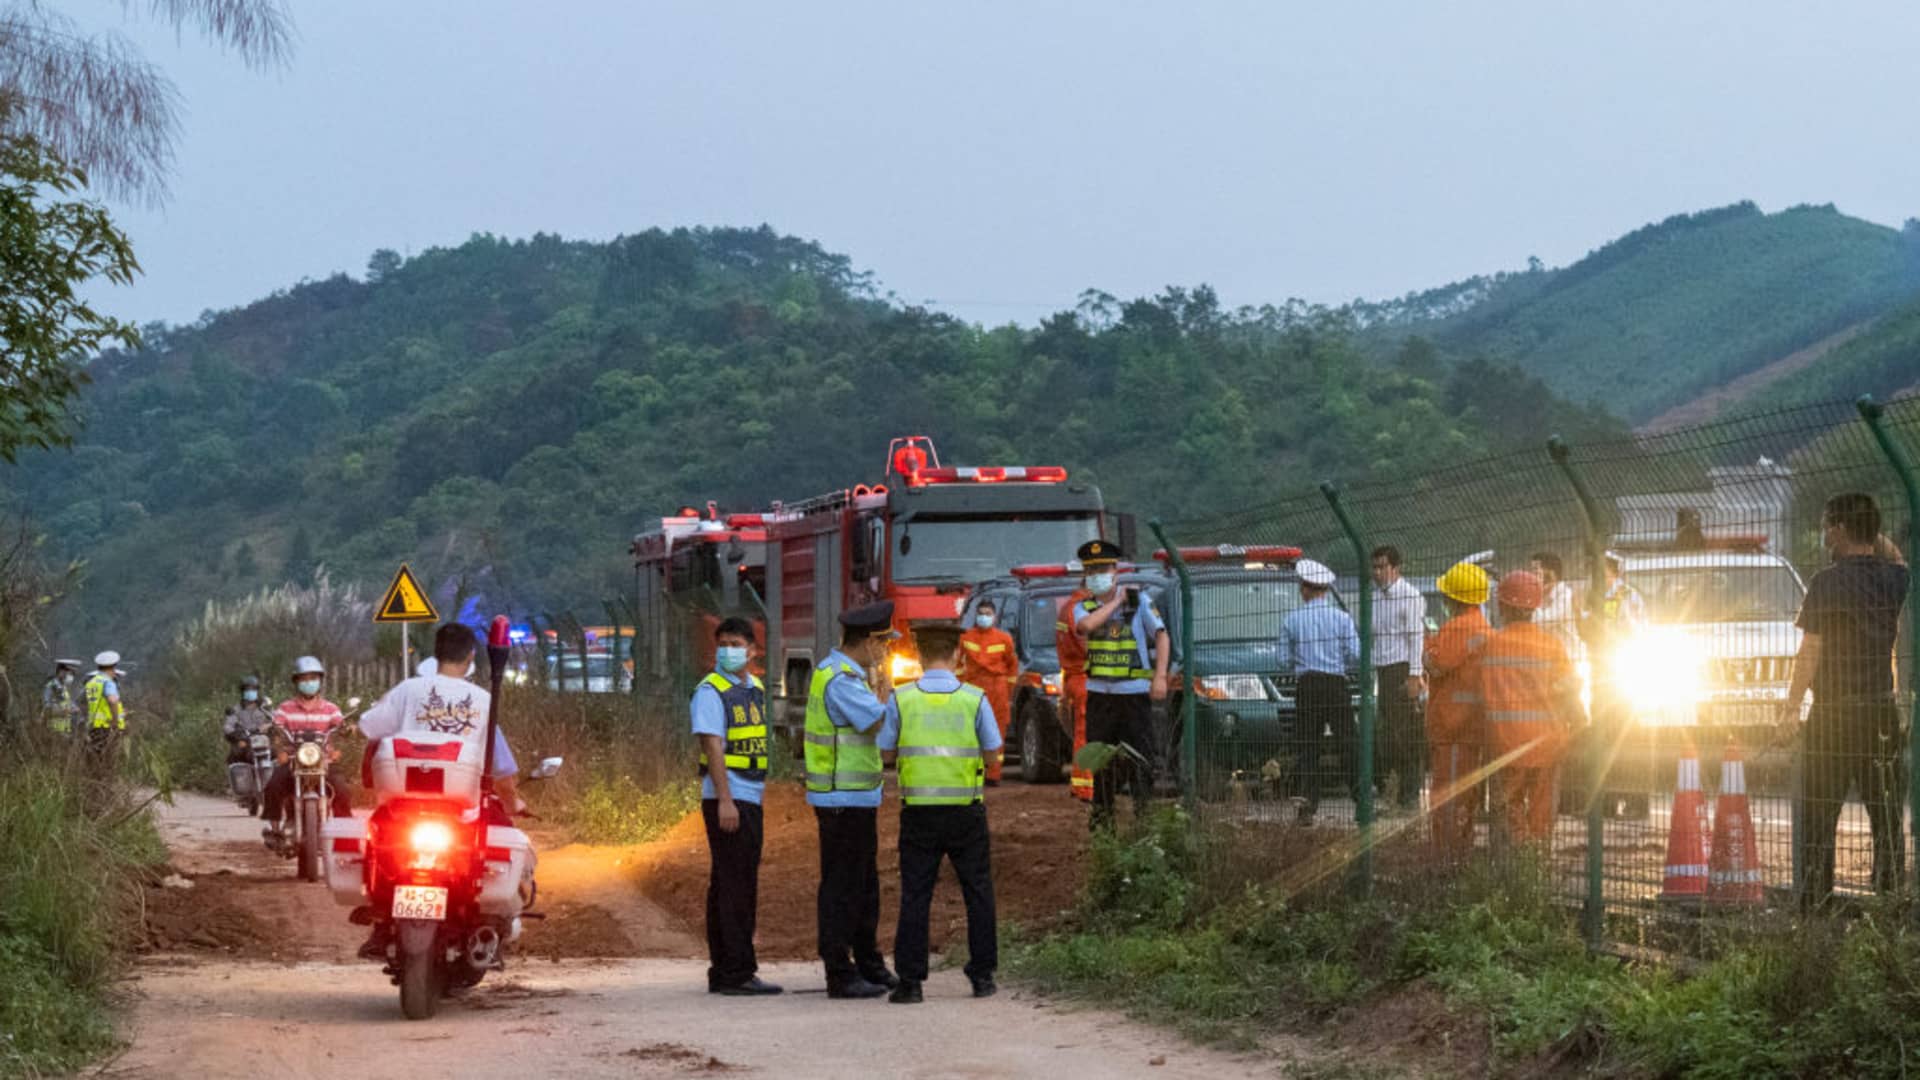 China Boeing 737 plane crash: No reports yet of bodies or survivors – CNBC